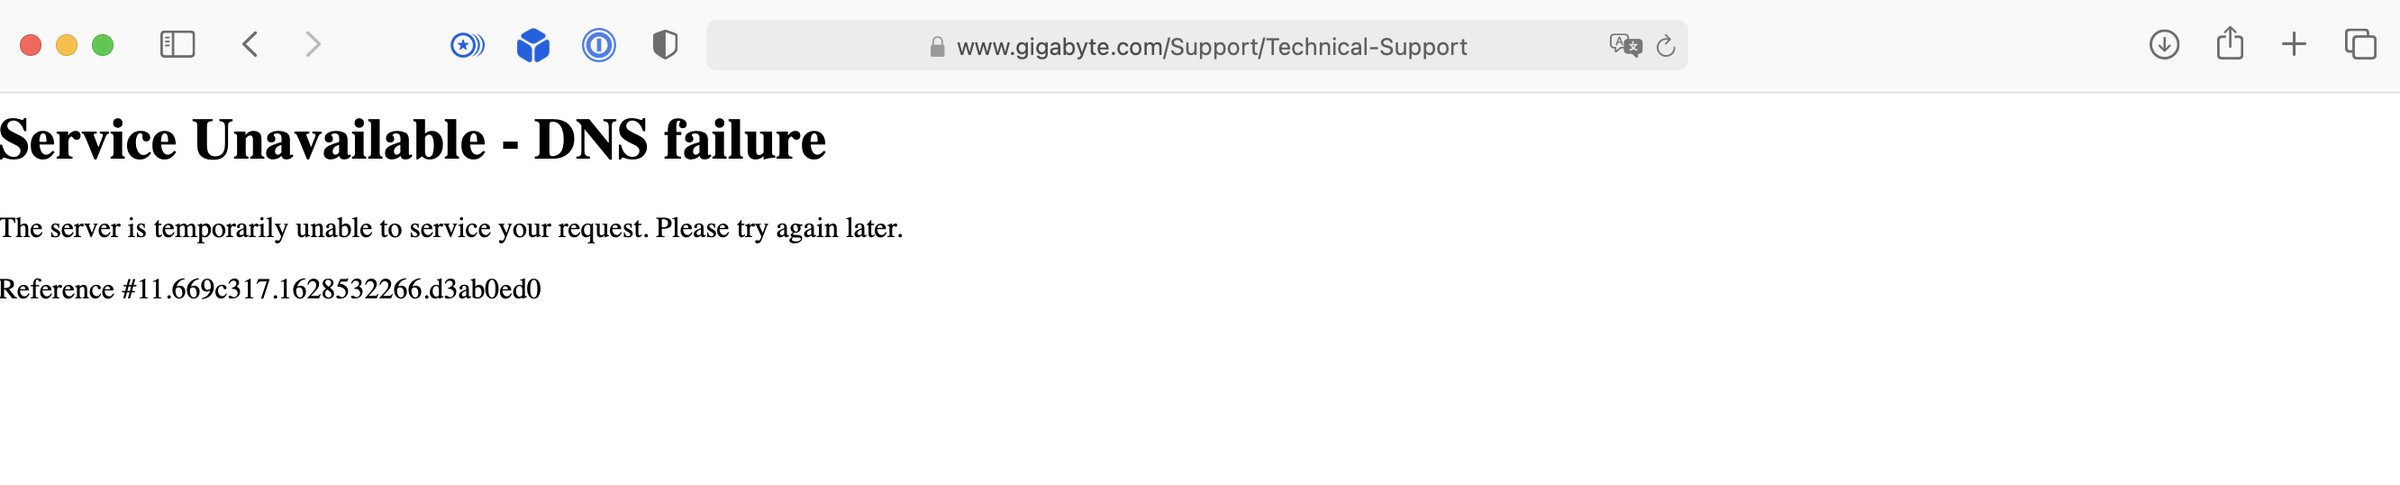 Various parts of Gigabyte’s website are nonfunctional.